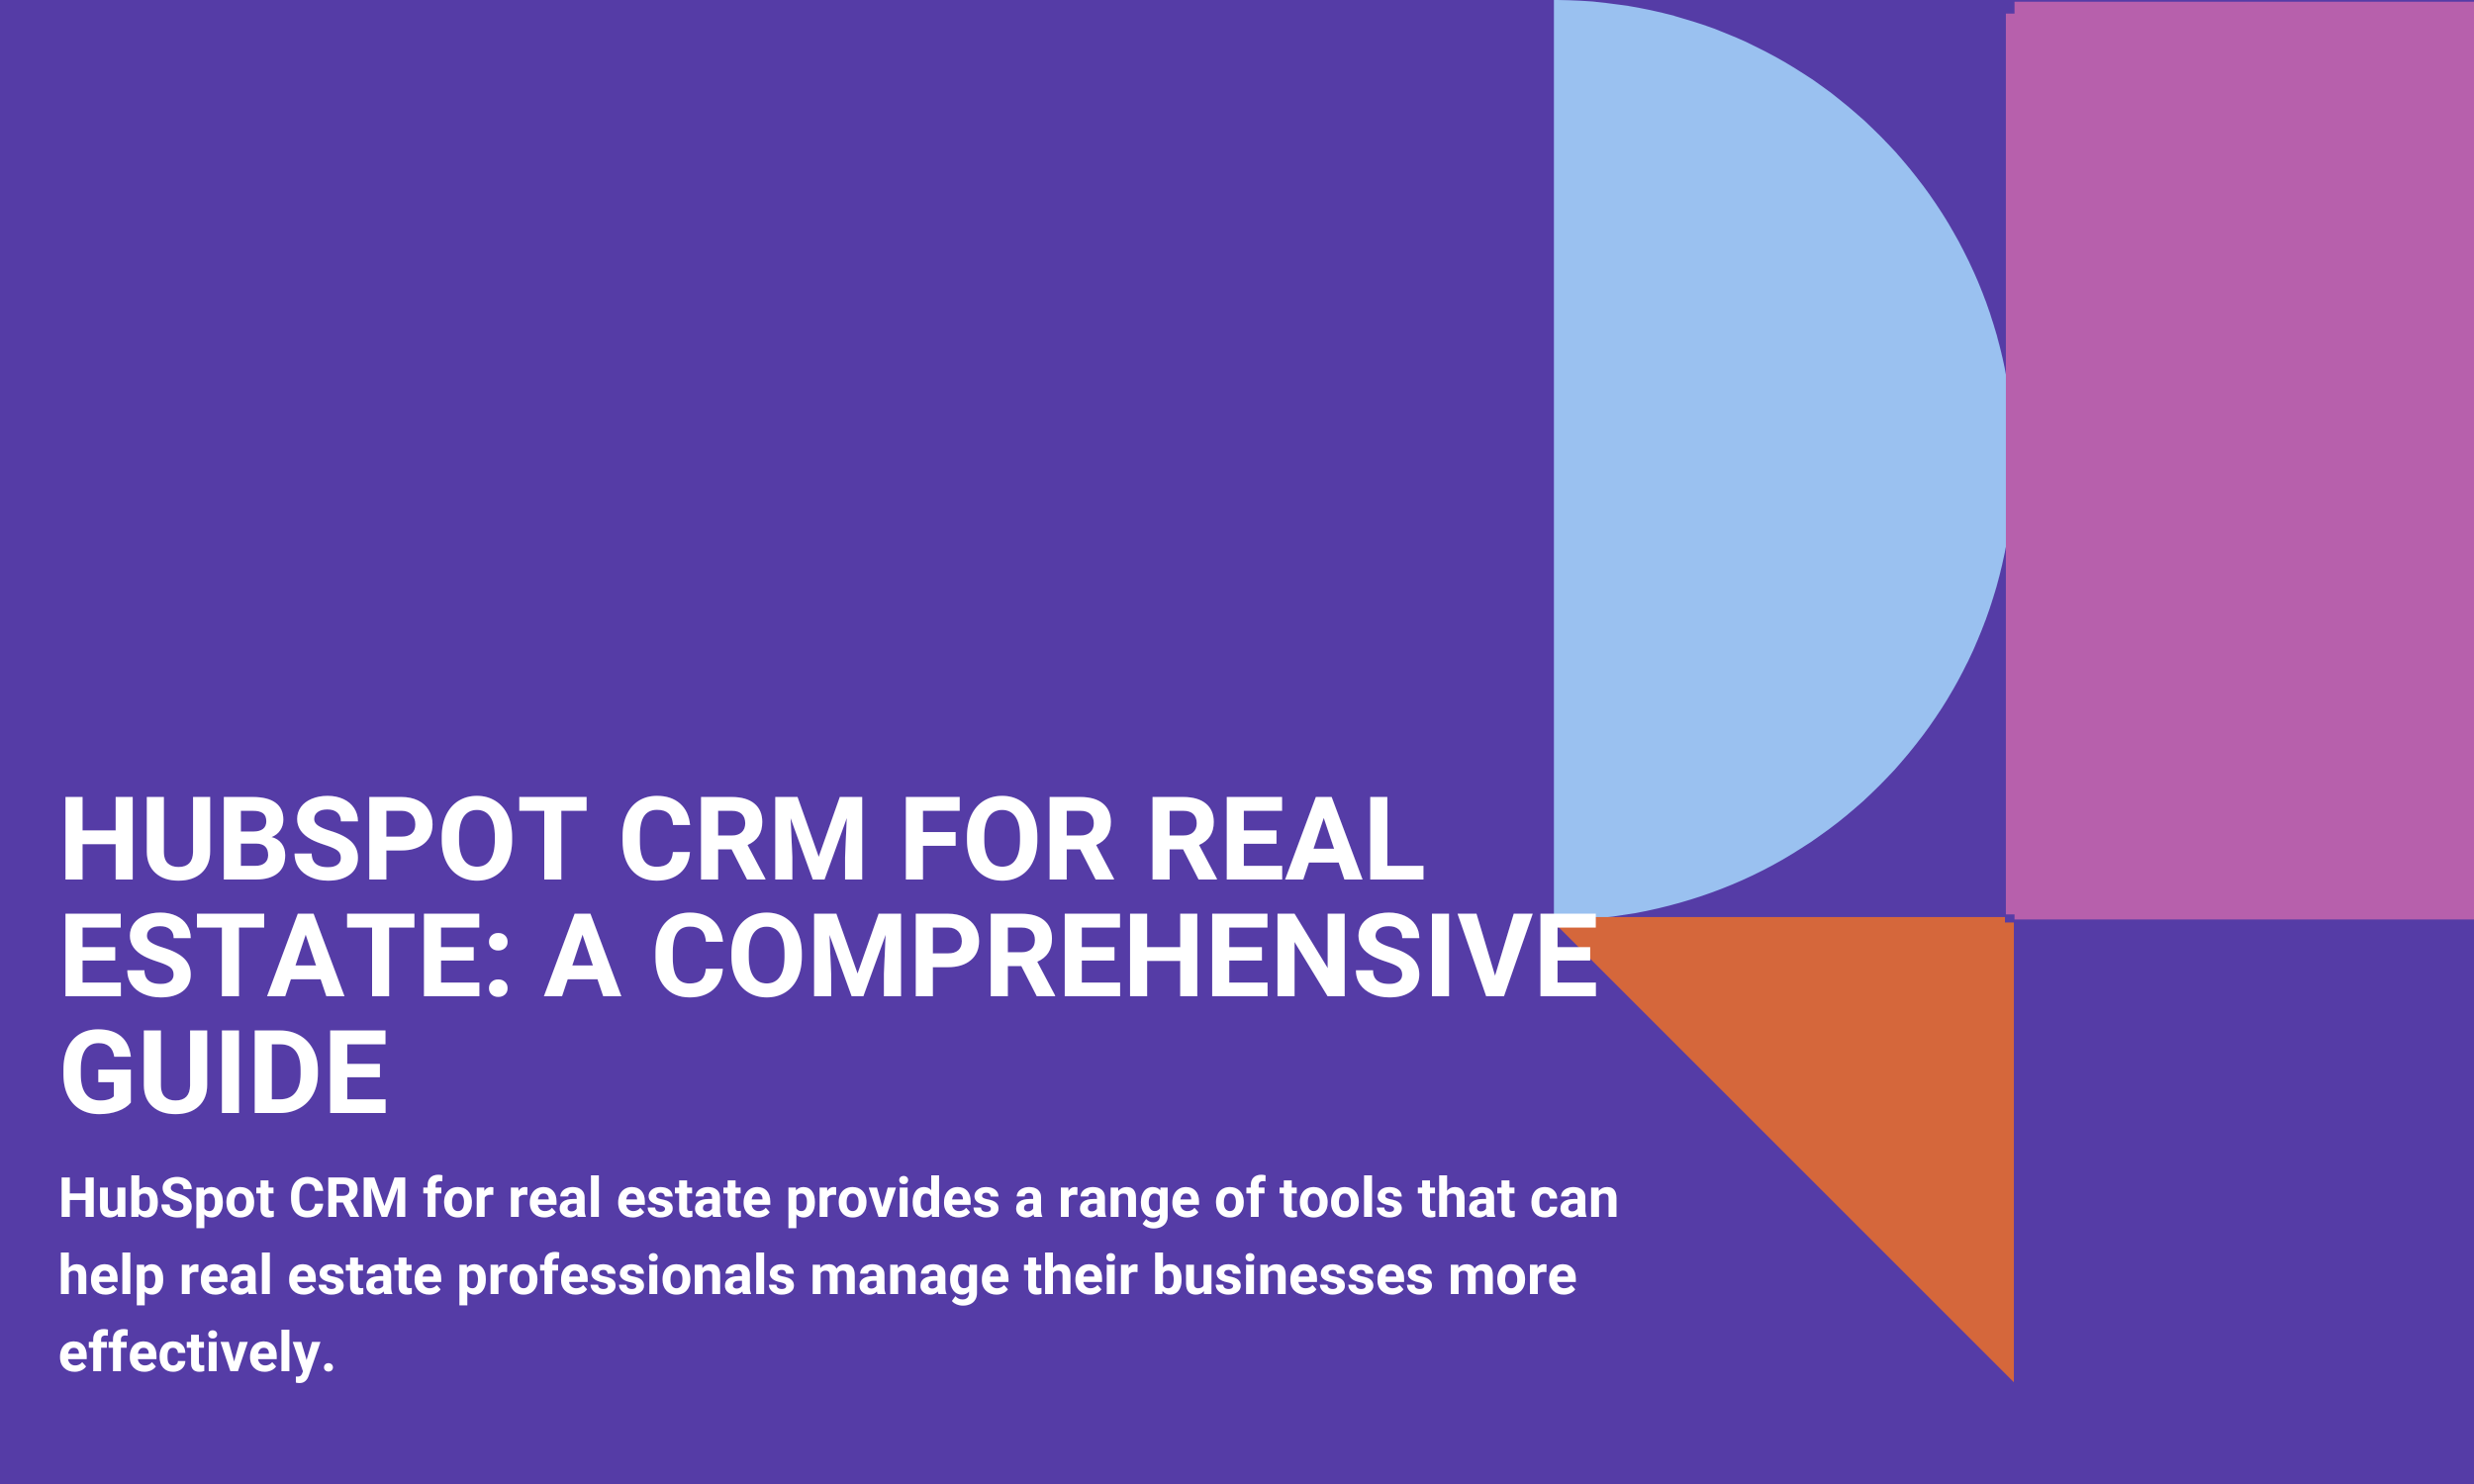 HubSpot CRM for Real Estate: A Comprehensive Guide